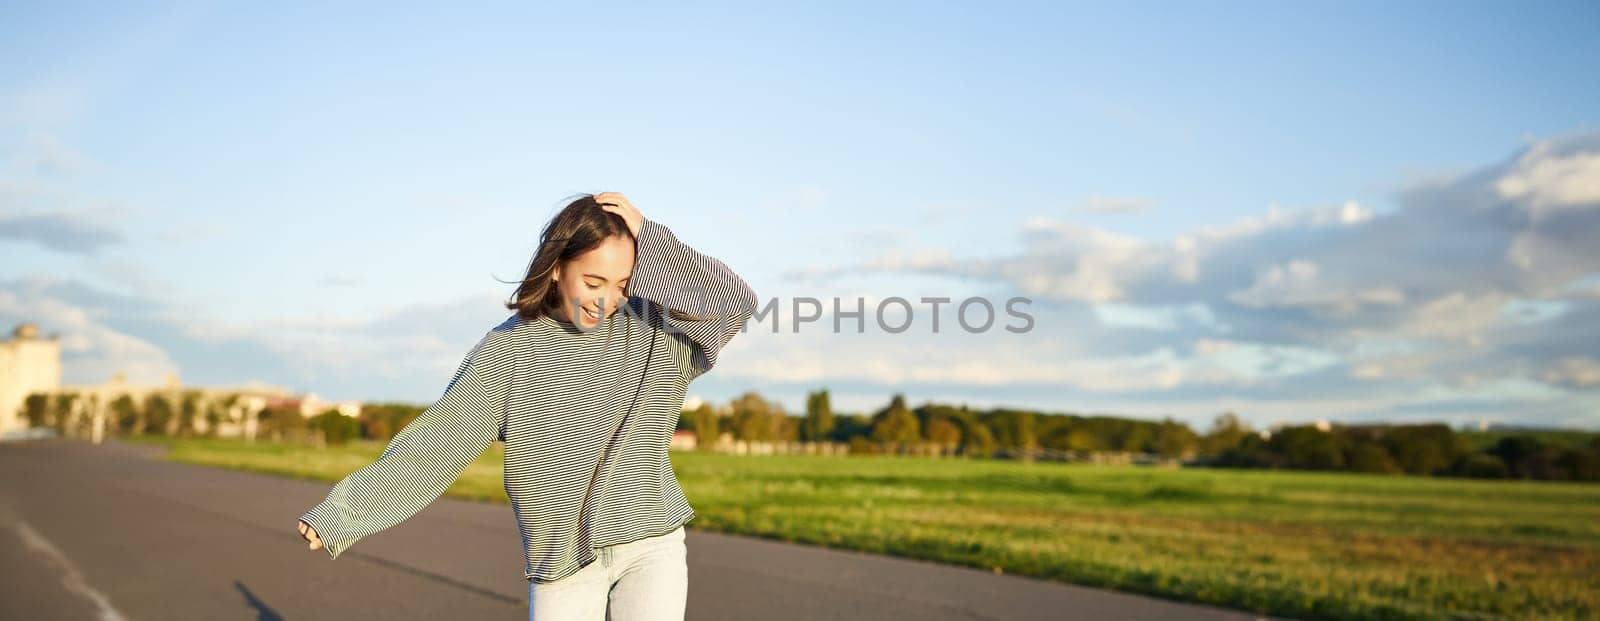 Vertical portrait of happy asian girl enjoying skateboard fun day out. Smiling korean skater on longboard, riding along empty street on sunny day.